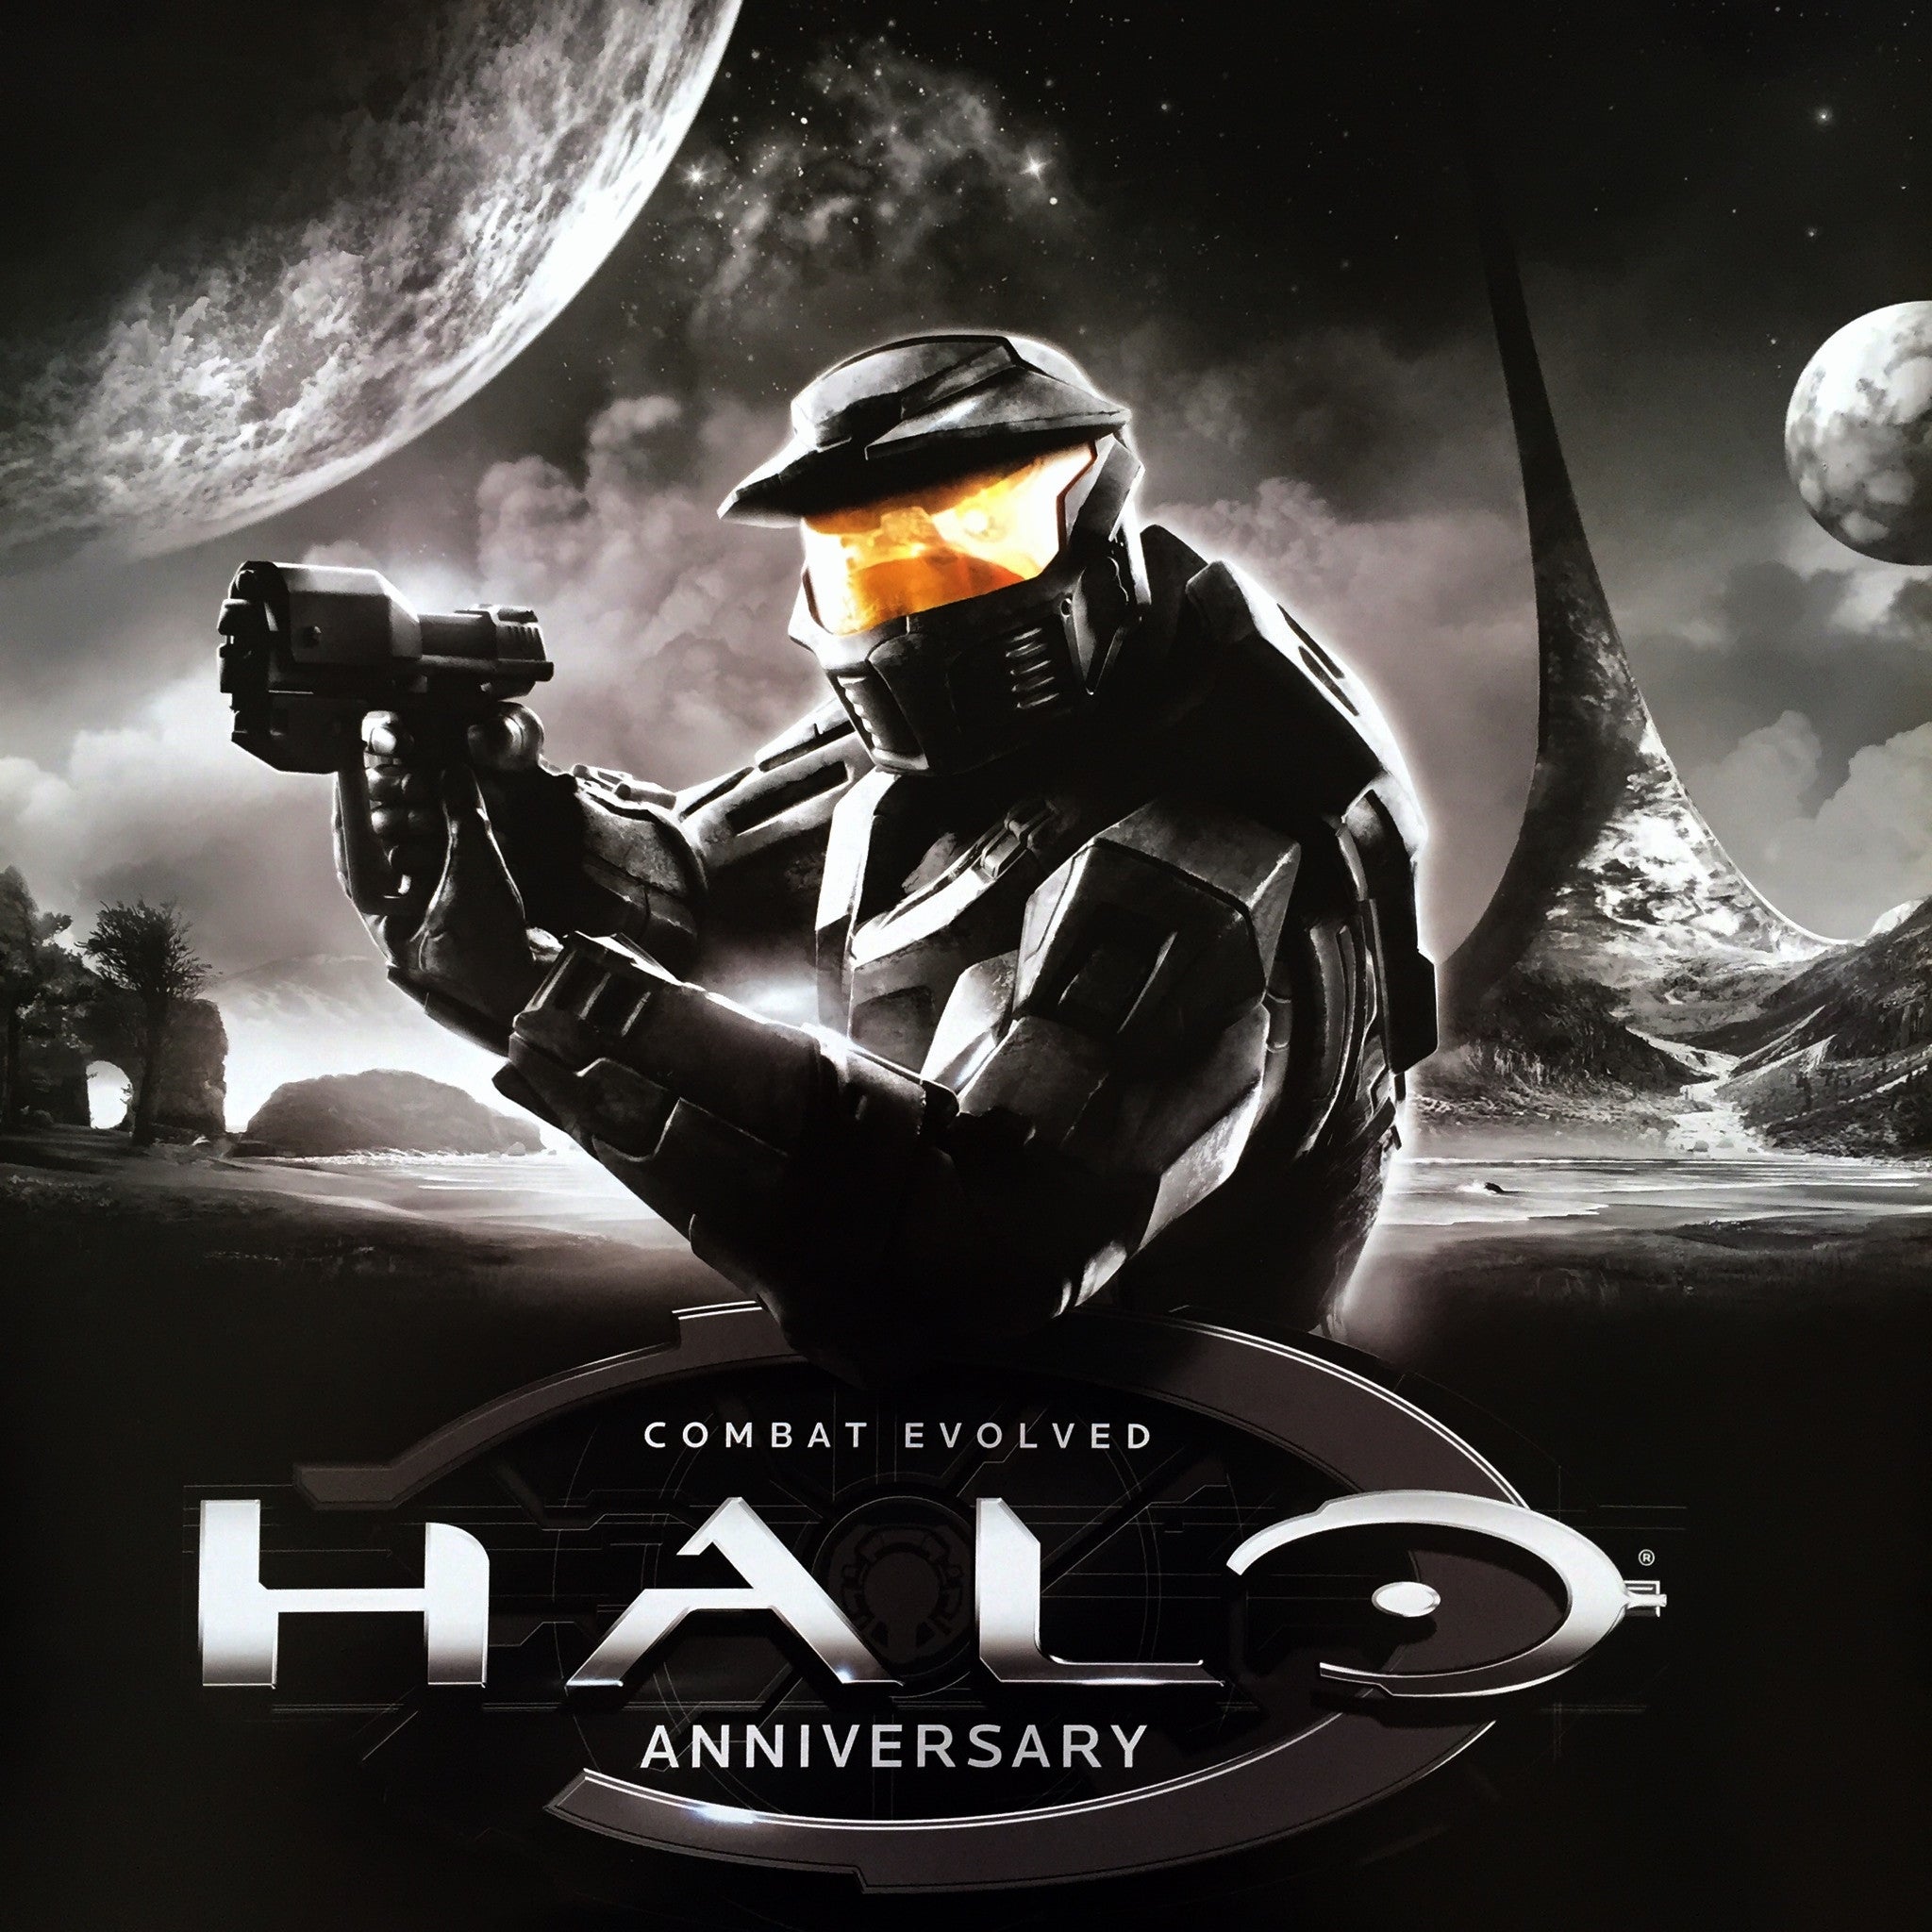 Halo: Combat Evolved Anniversary (B2) Japanese Promotional Poster